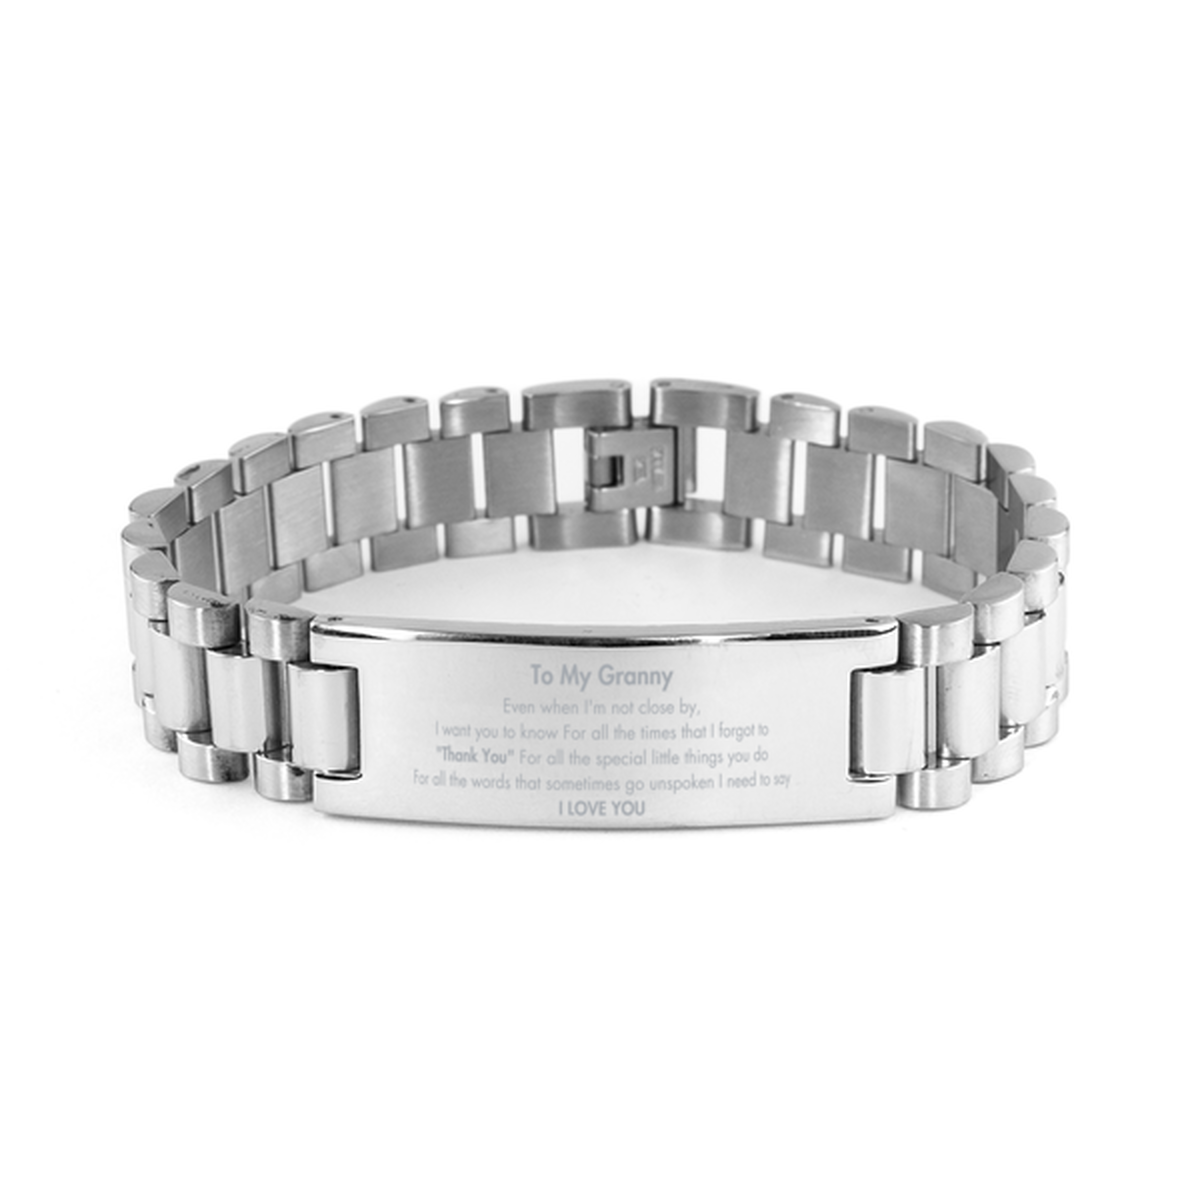 Thank You Gifts for Granny, Keepsake Ladder Stainless Steel Bracelet Gifts for Granny Birthday Mother's day Father's Day Granny For all the words That sometimes go unspoken I need to say I LOVE YOU